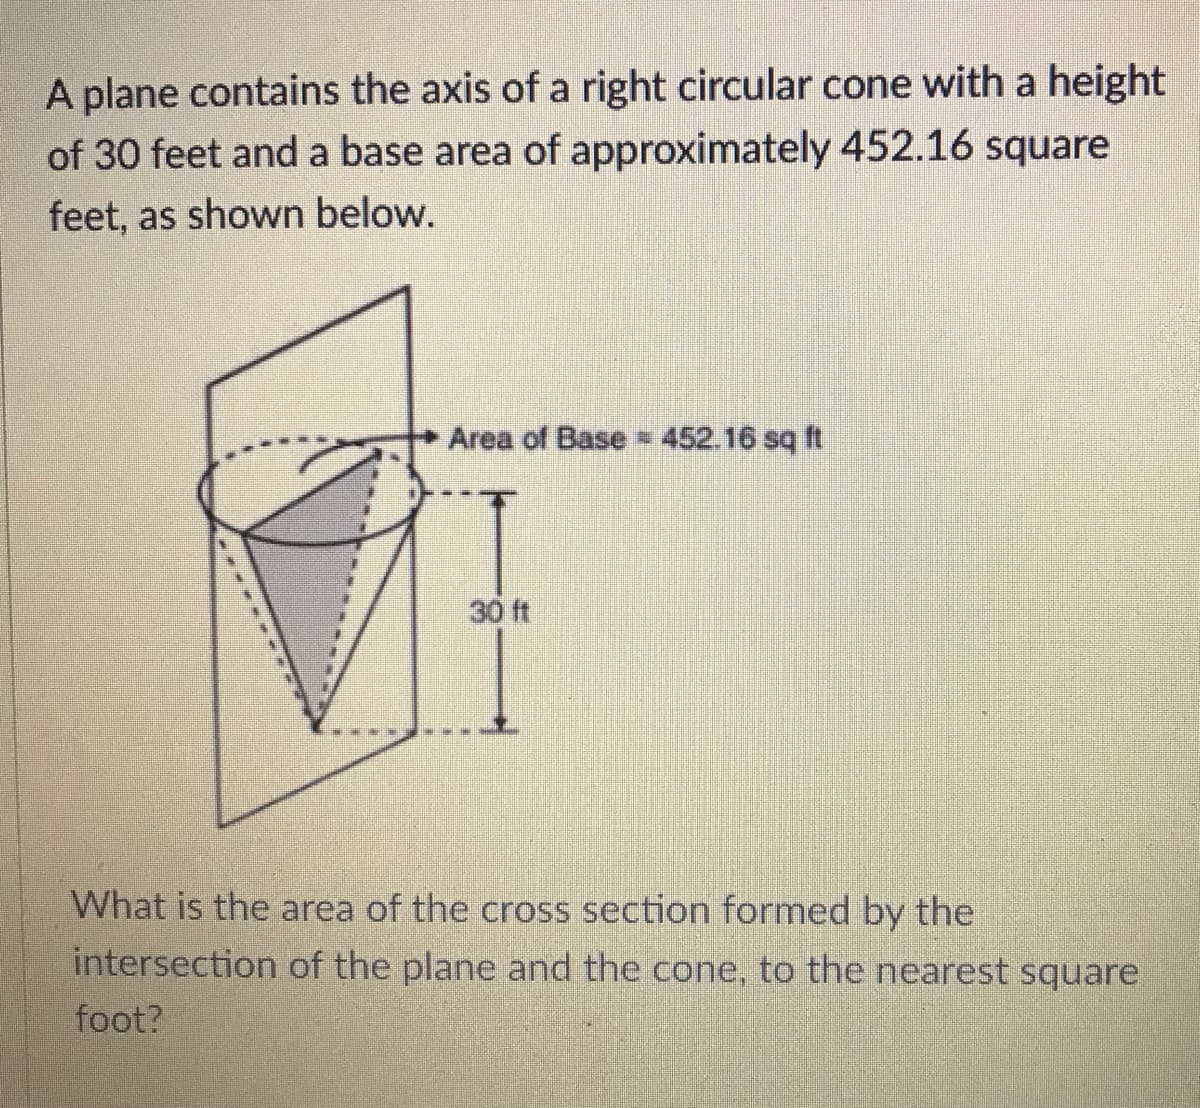 A plane contains the axis of a right circular cone with a height
of 30 feet and a base area of approximately 452.16 square
feet, as shown below.
Area of Base 452.16 sq ft
30 ft
What is the area of the cross section formed by the
intersection of the plane and the cone, to the nearest square
foot?
